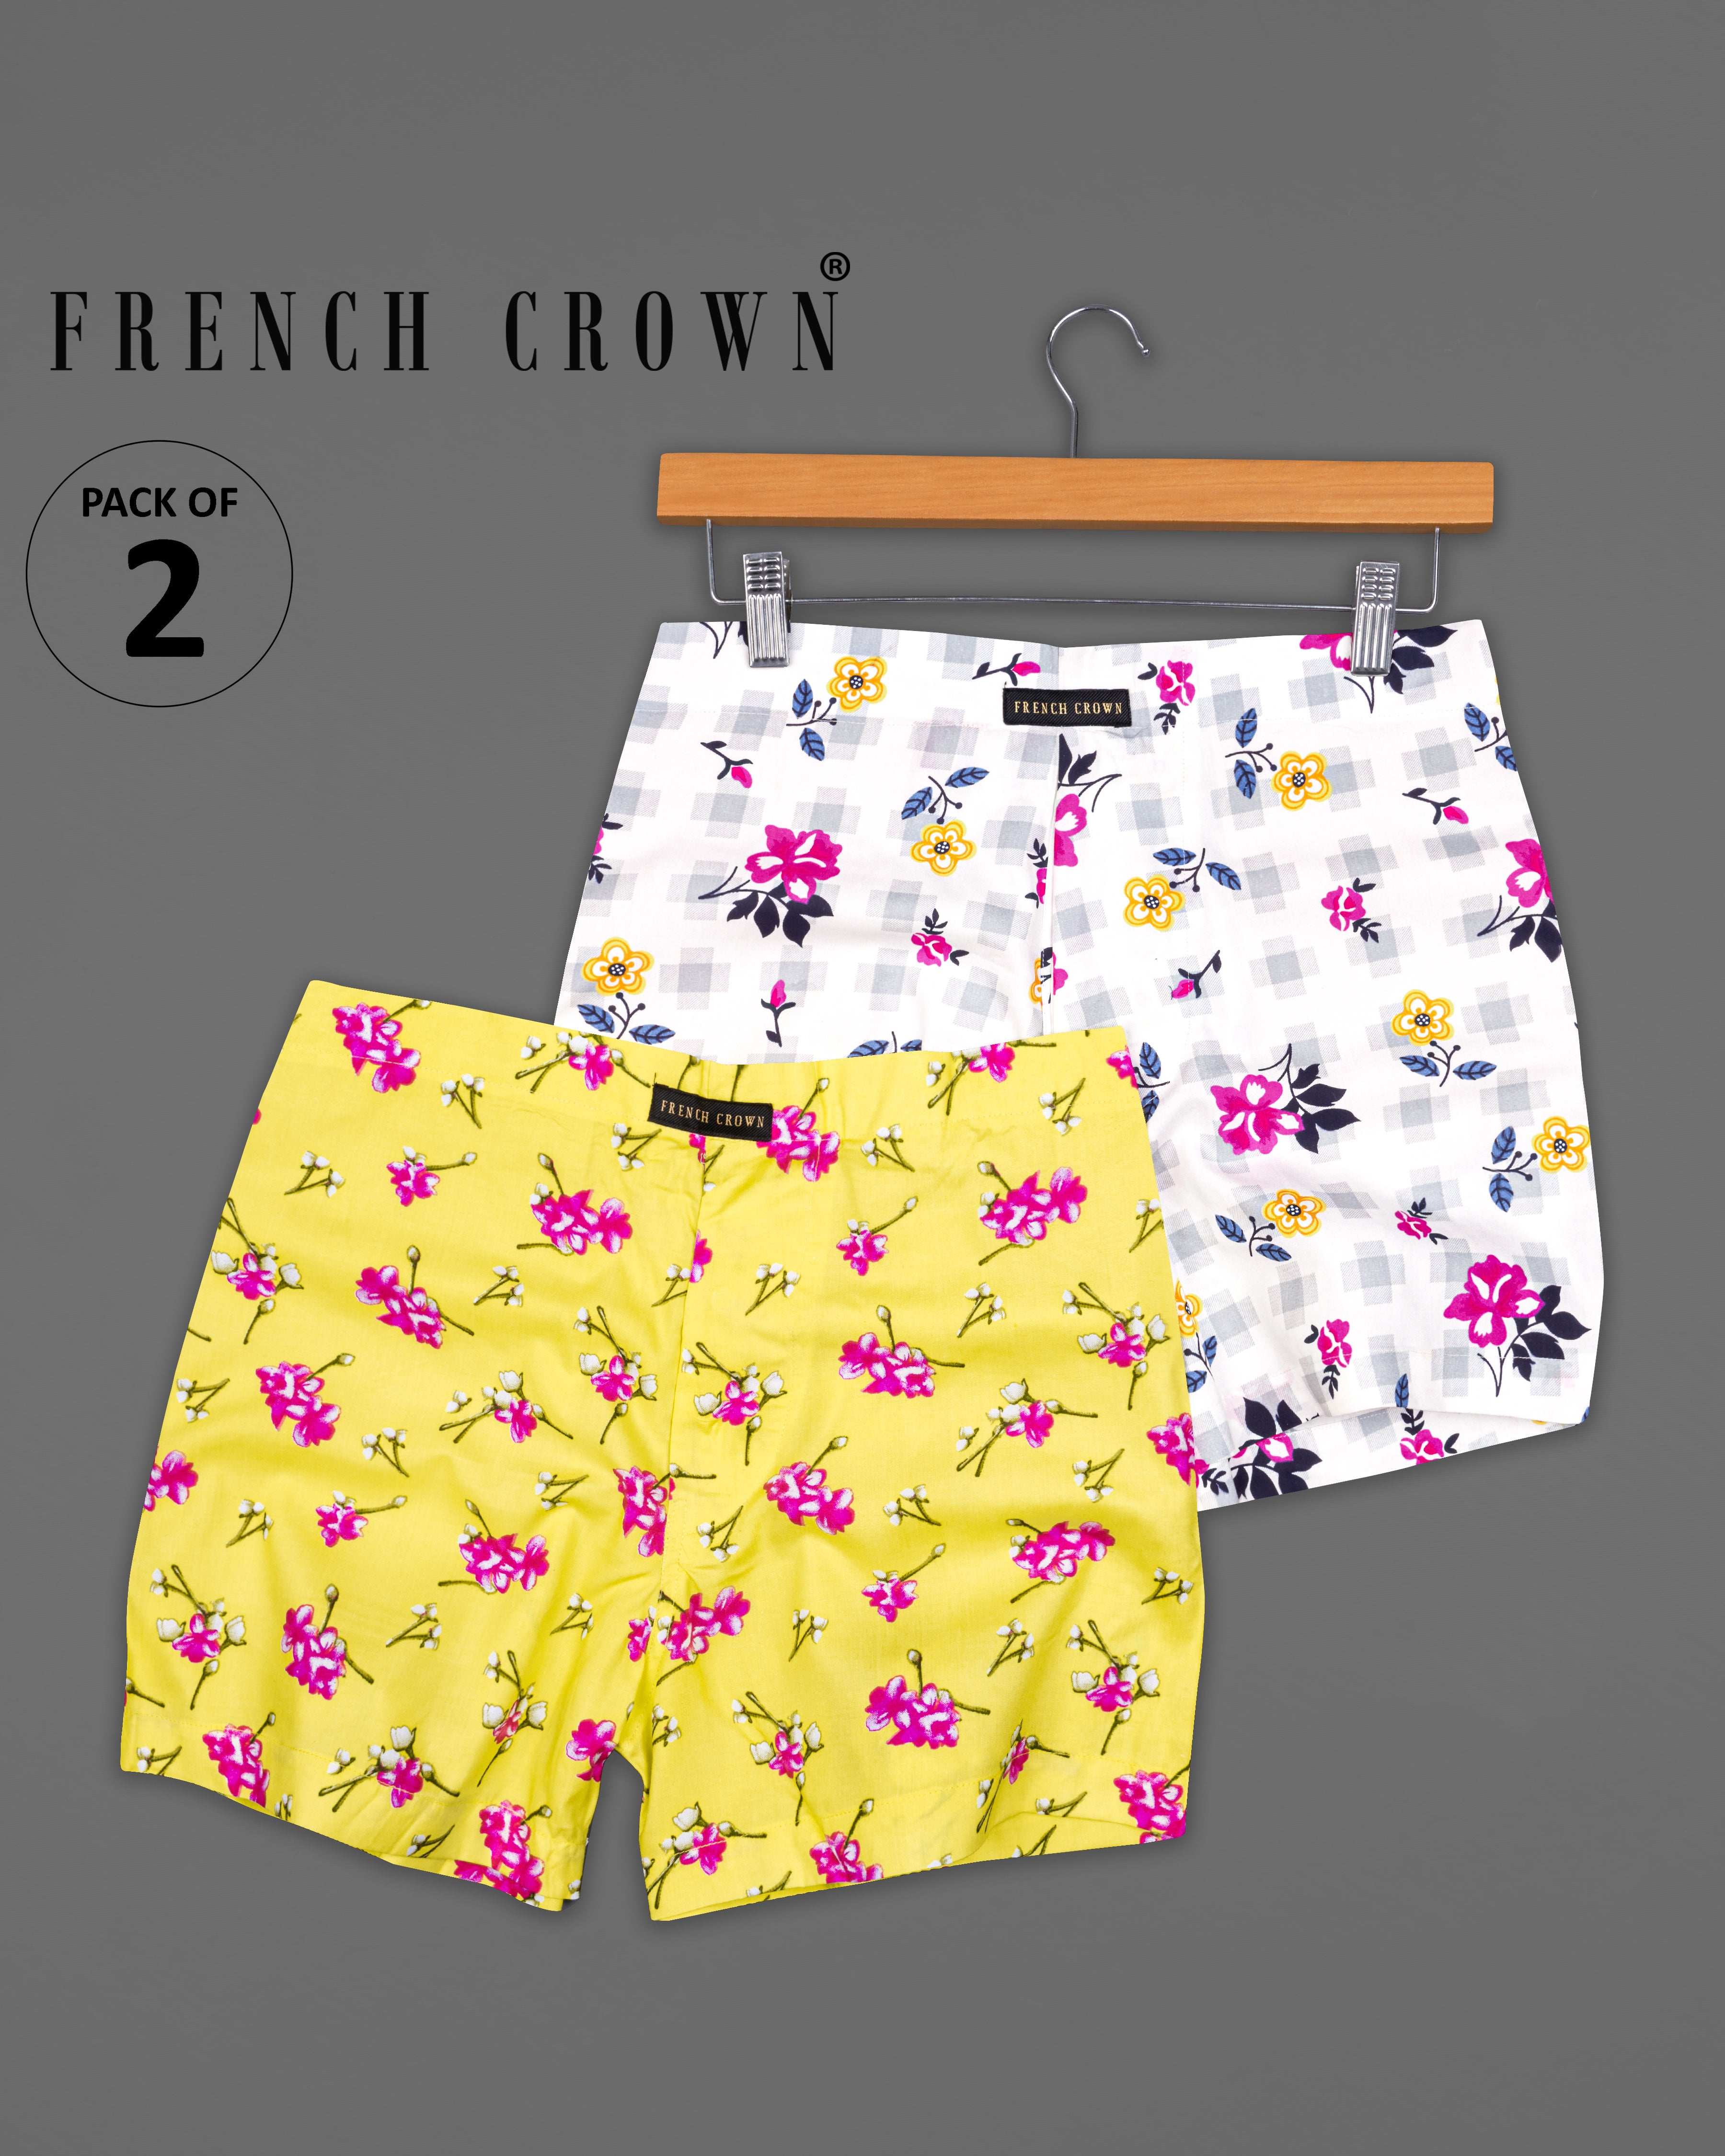 Bright White Floral Printed with Desert Storm Yellow Floral Printed Premium Cotton Boxers